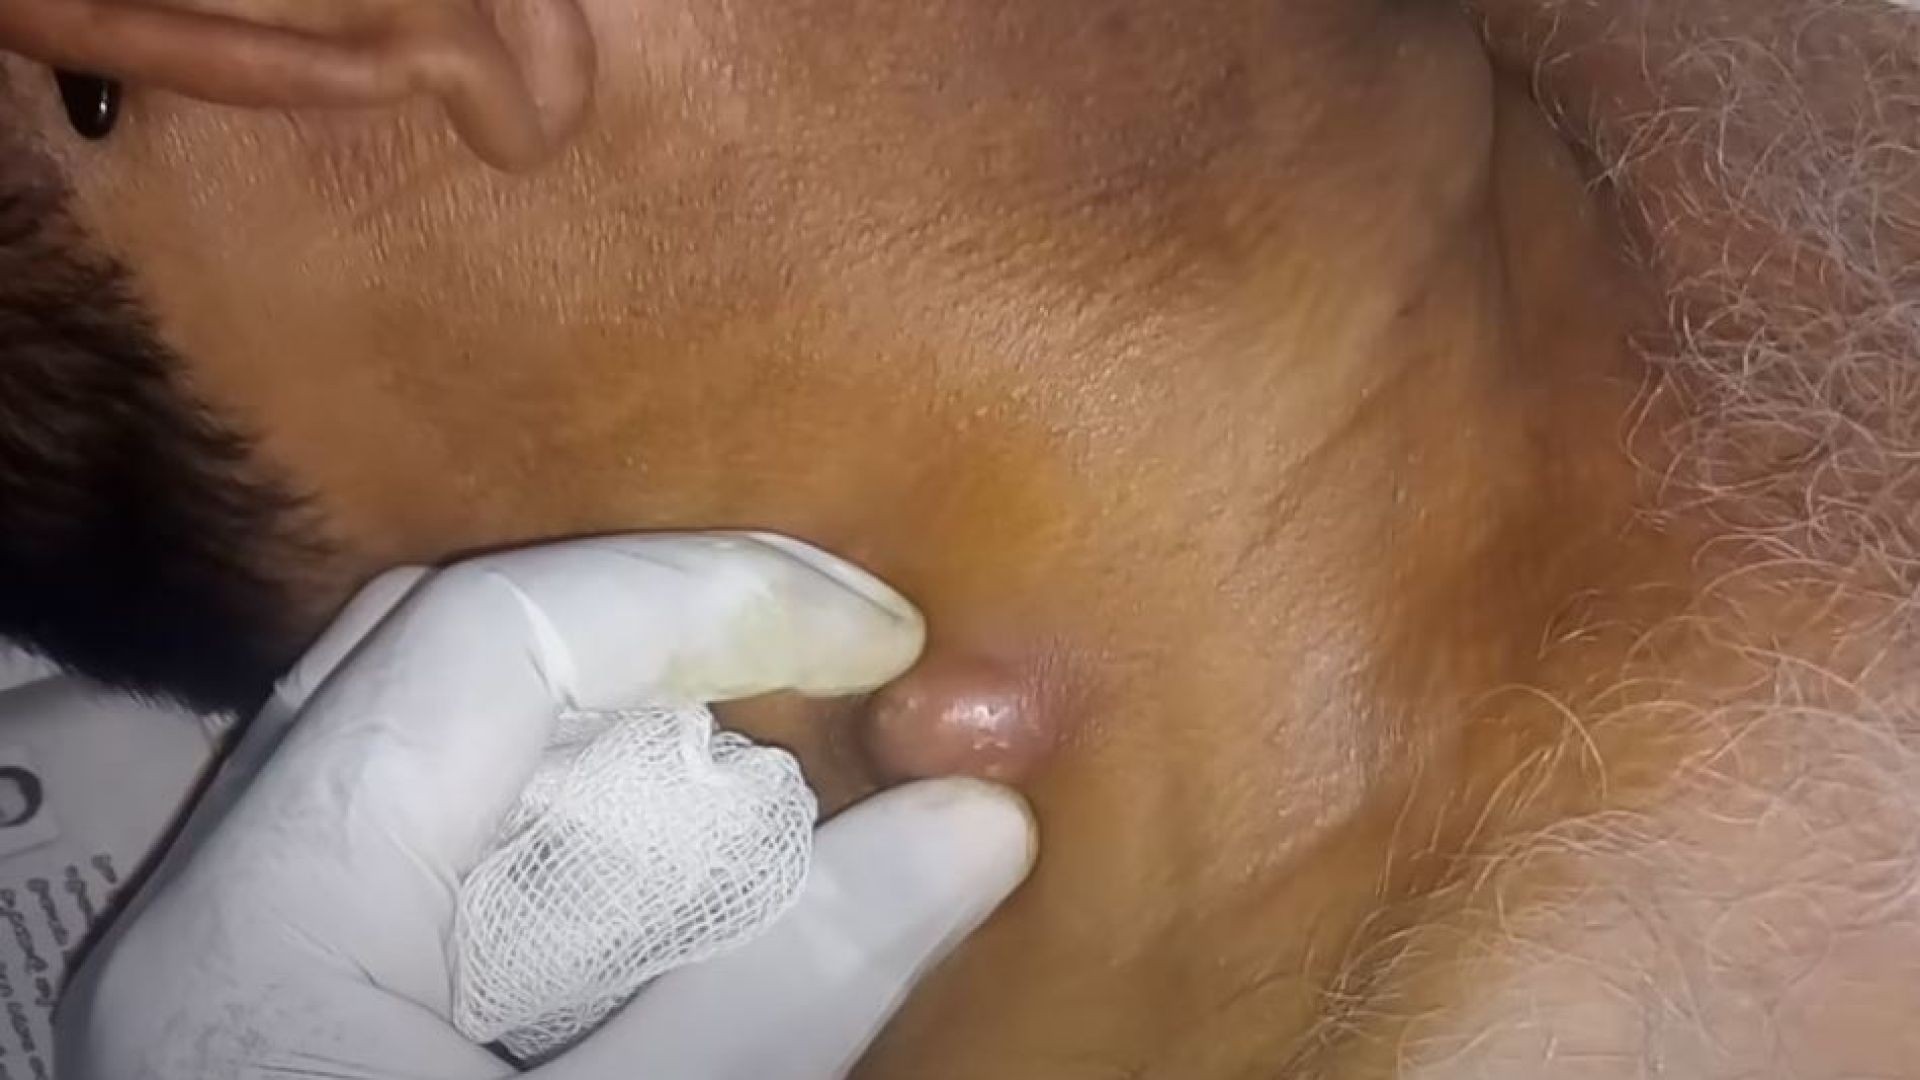 Abscess at the neck with huge huge pus popping out. A million view video is here